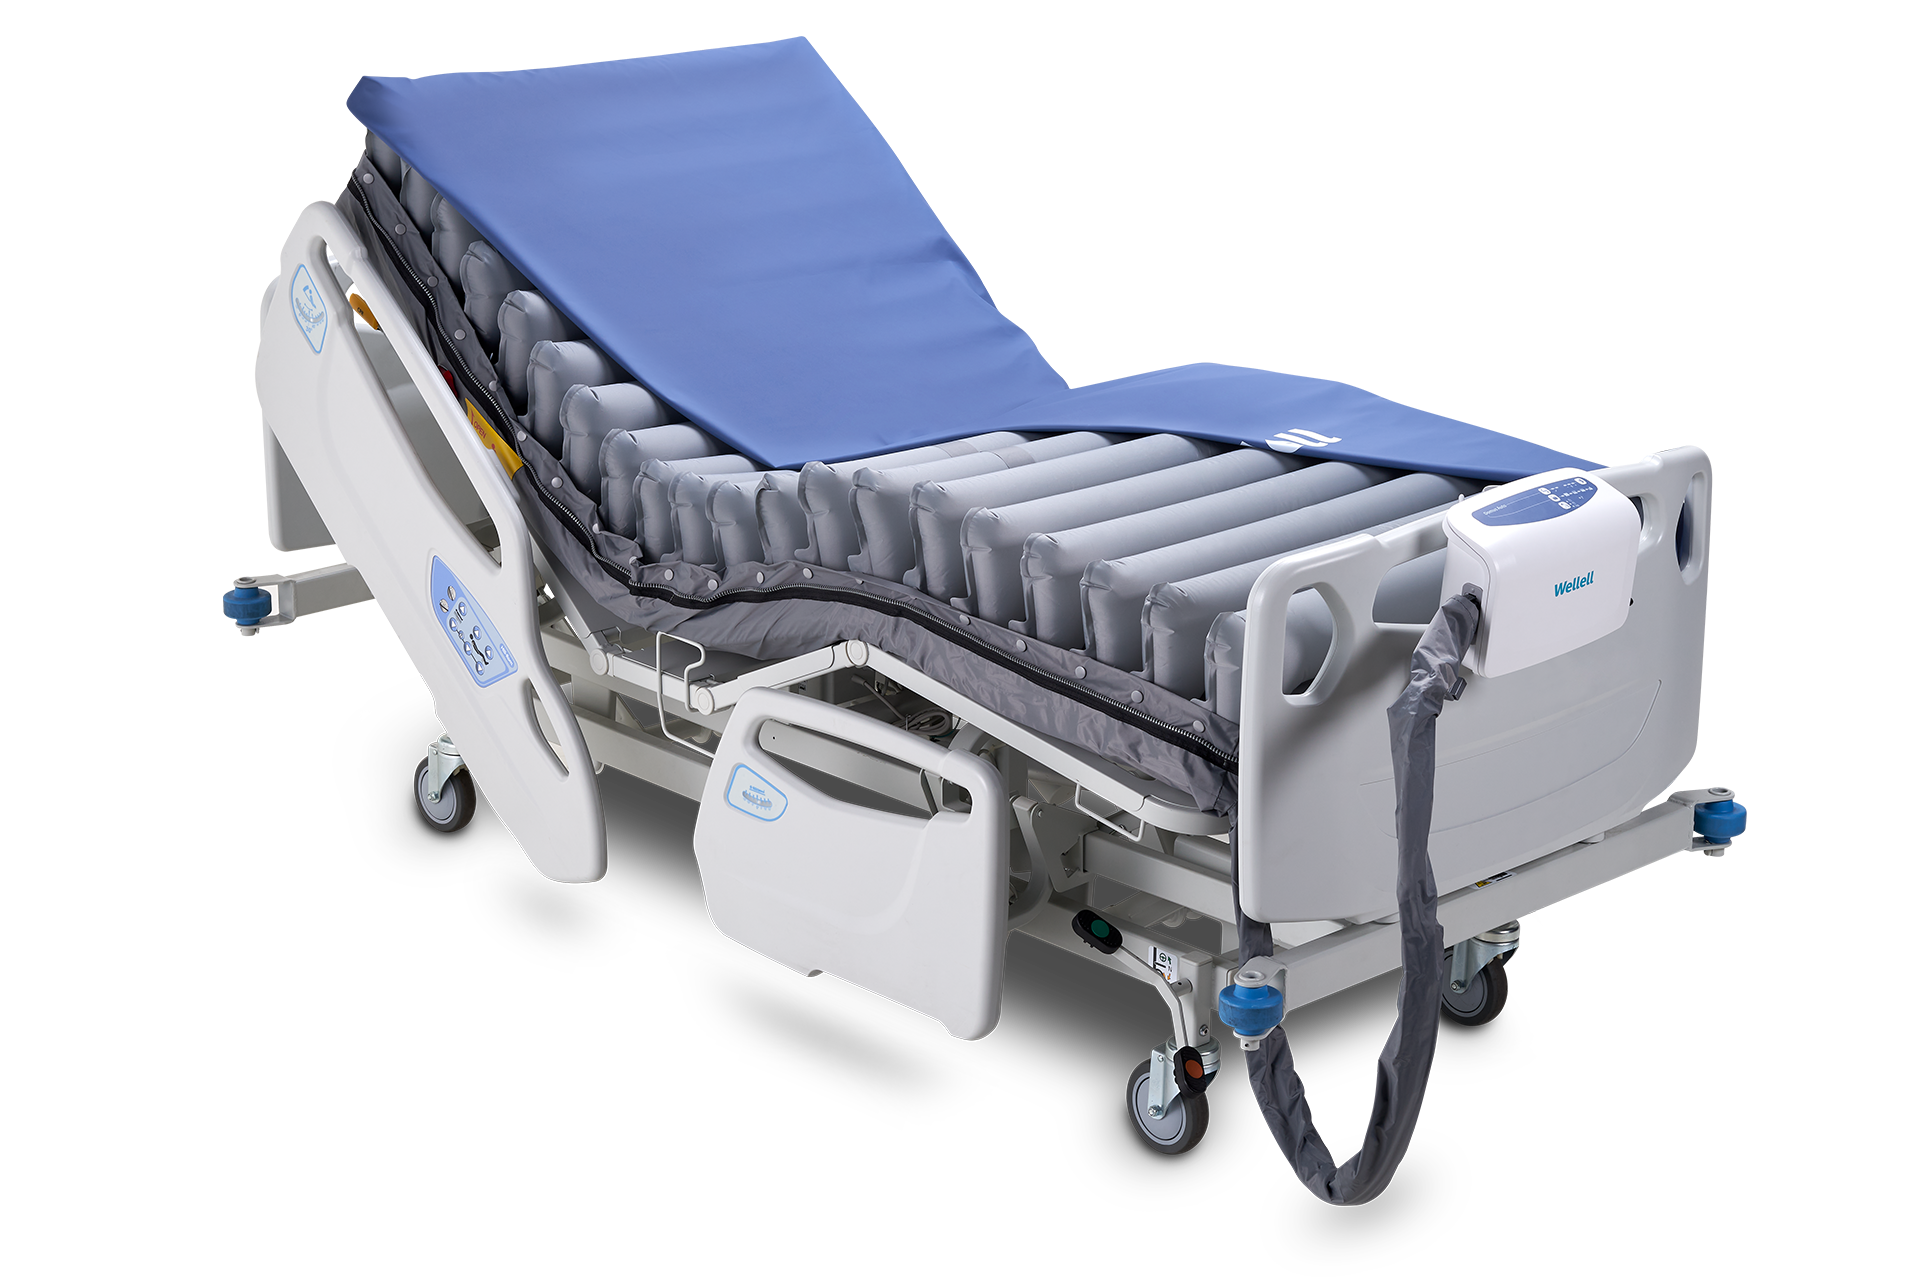 Domus 4 - Medical Bed - Wellell